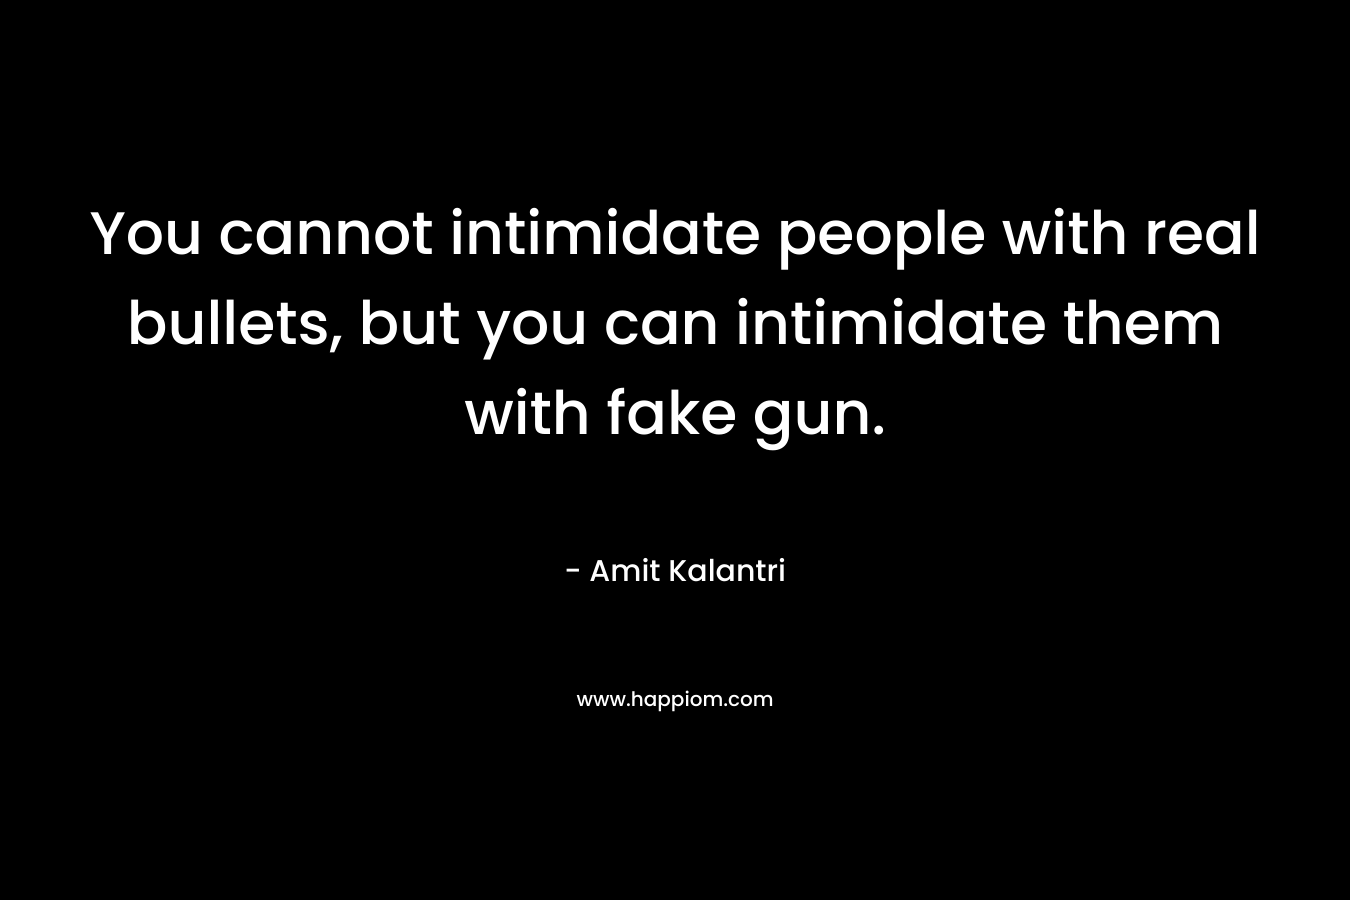 You cannot intimidate people with real bullets, but you can intimidate them with fake gun. – Amit Kalantri